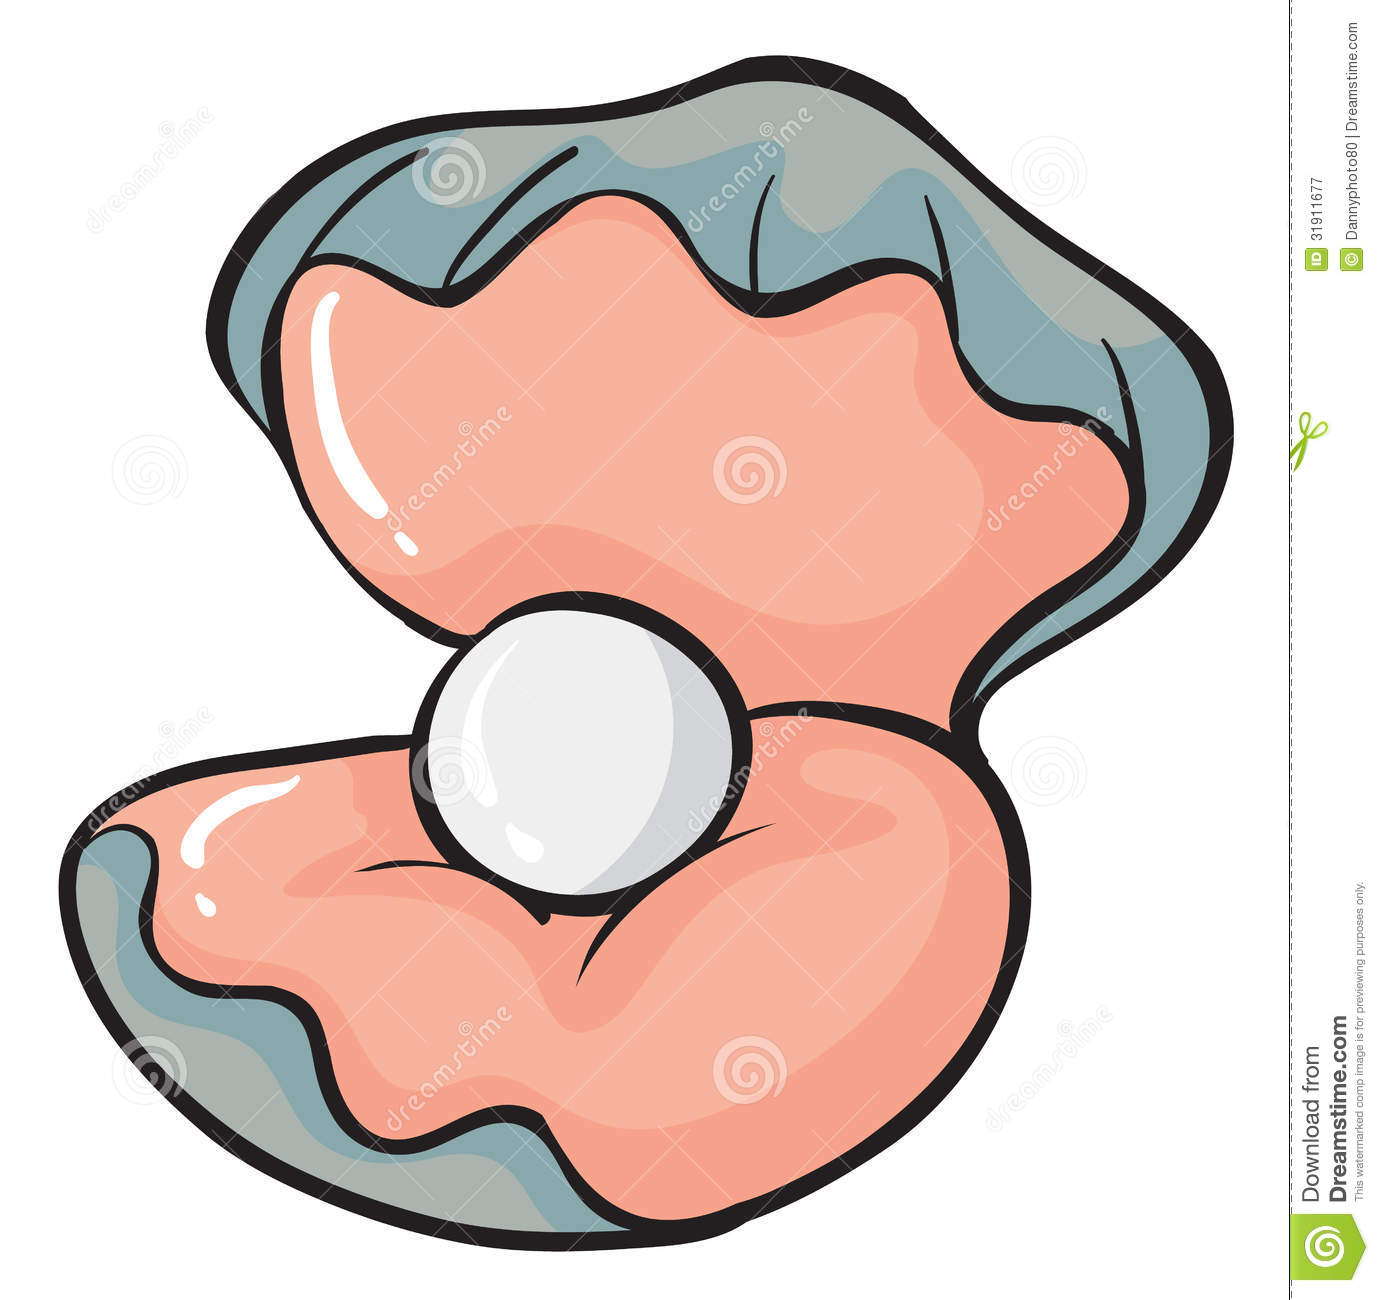 Oyster Cartoon PNG - 73257